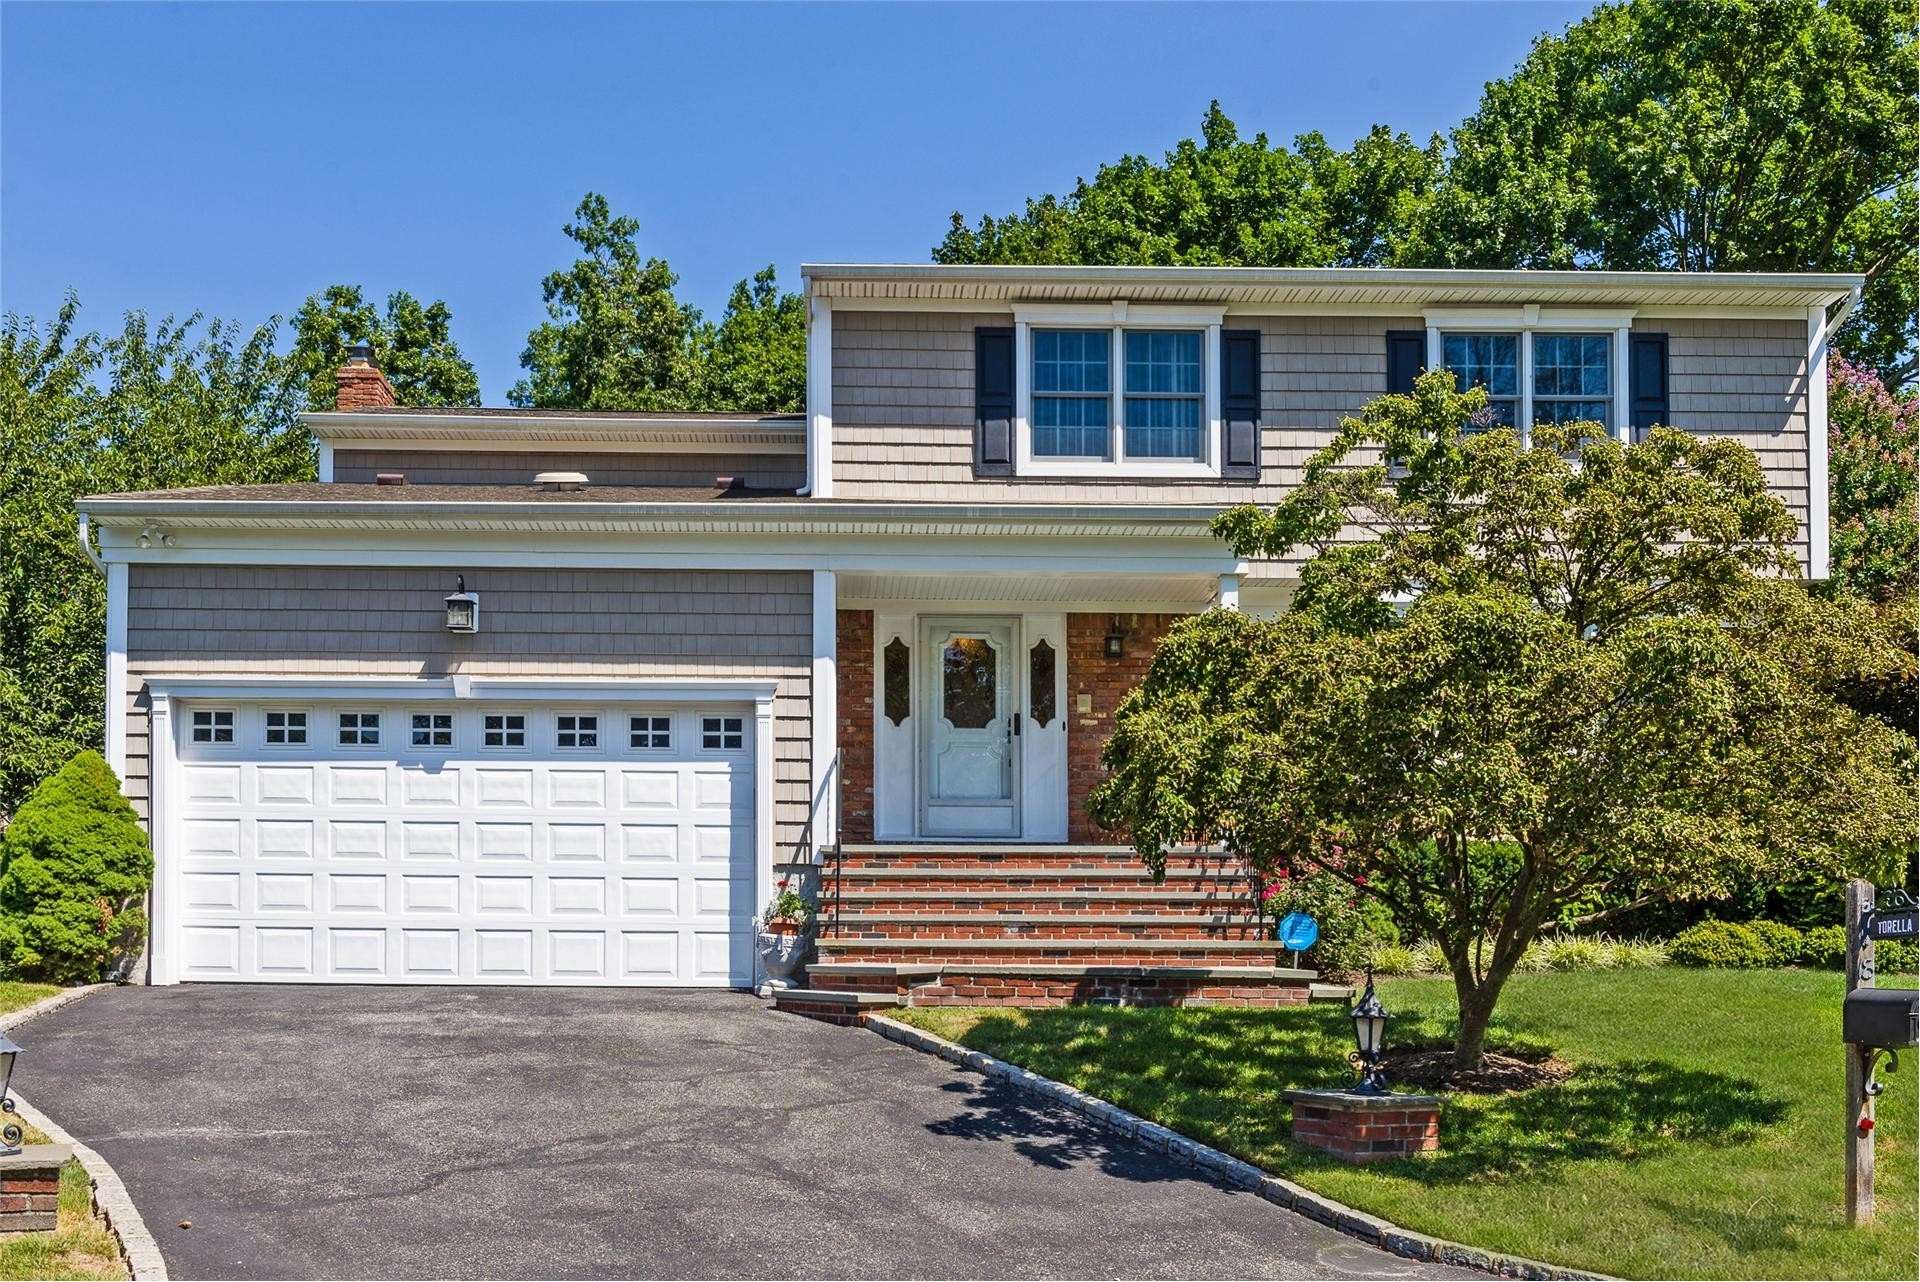 Single Family Home at Syosset